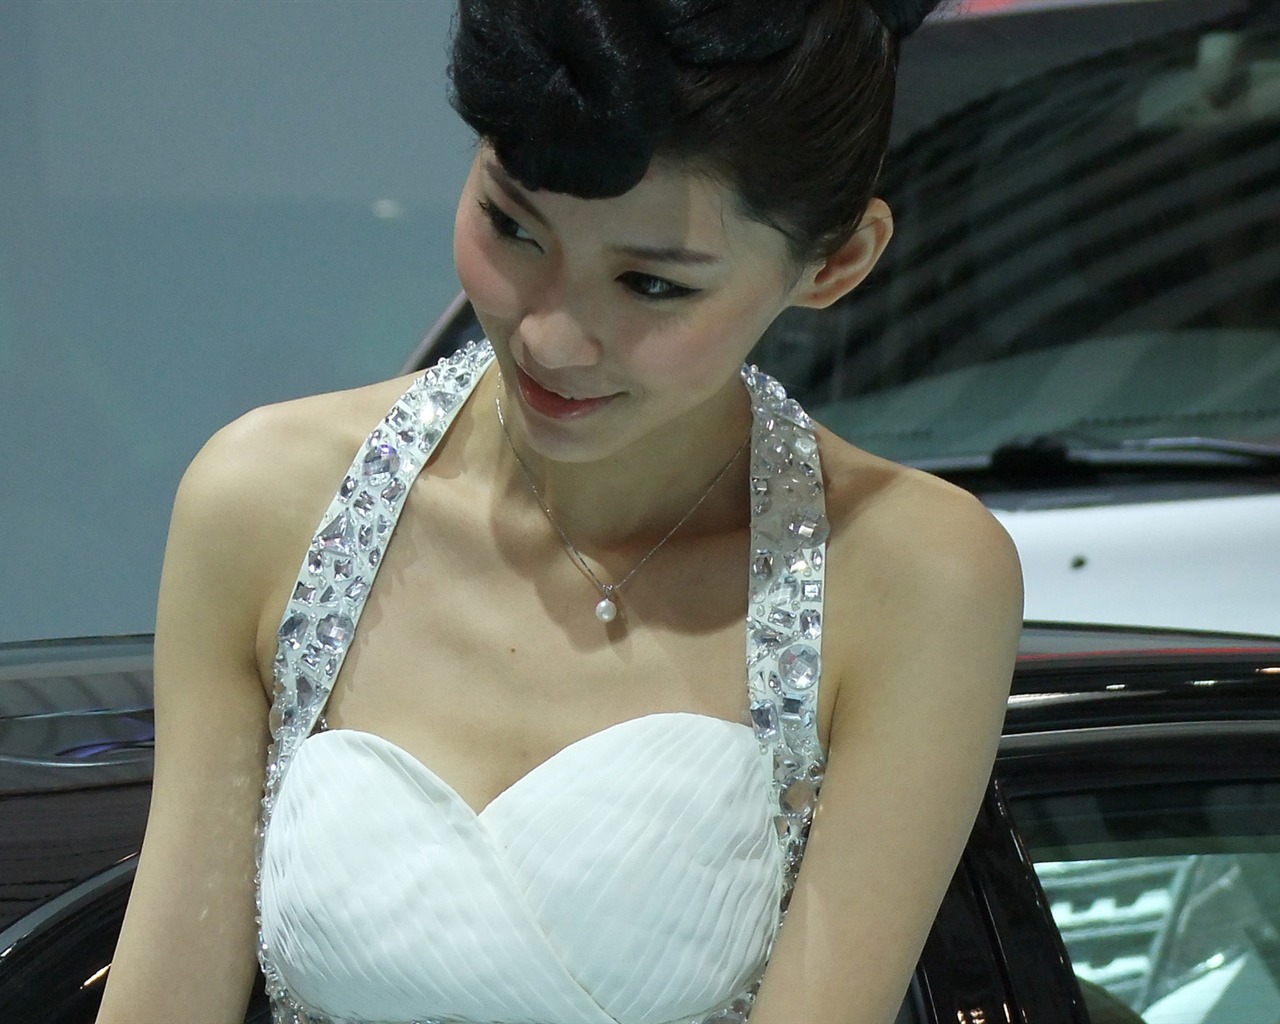 2010 Beijing Auto Show car models Collection (2) #1 - 1280x1024